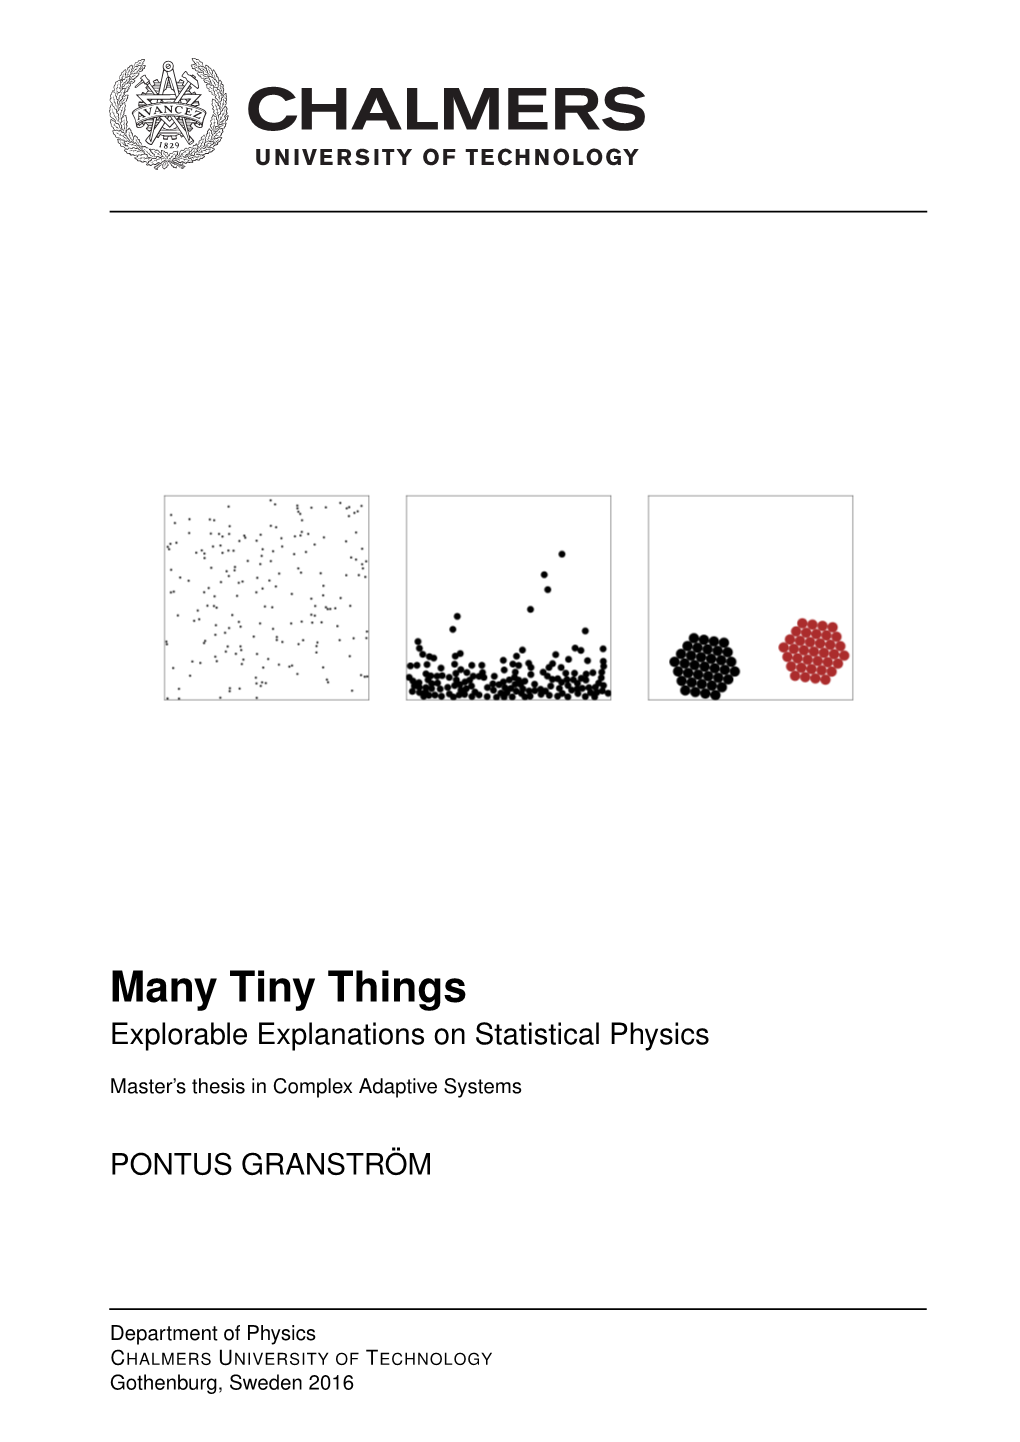 Many Tiny Things Explorable Explanations on Statistical Physics